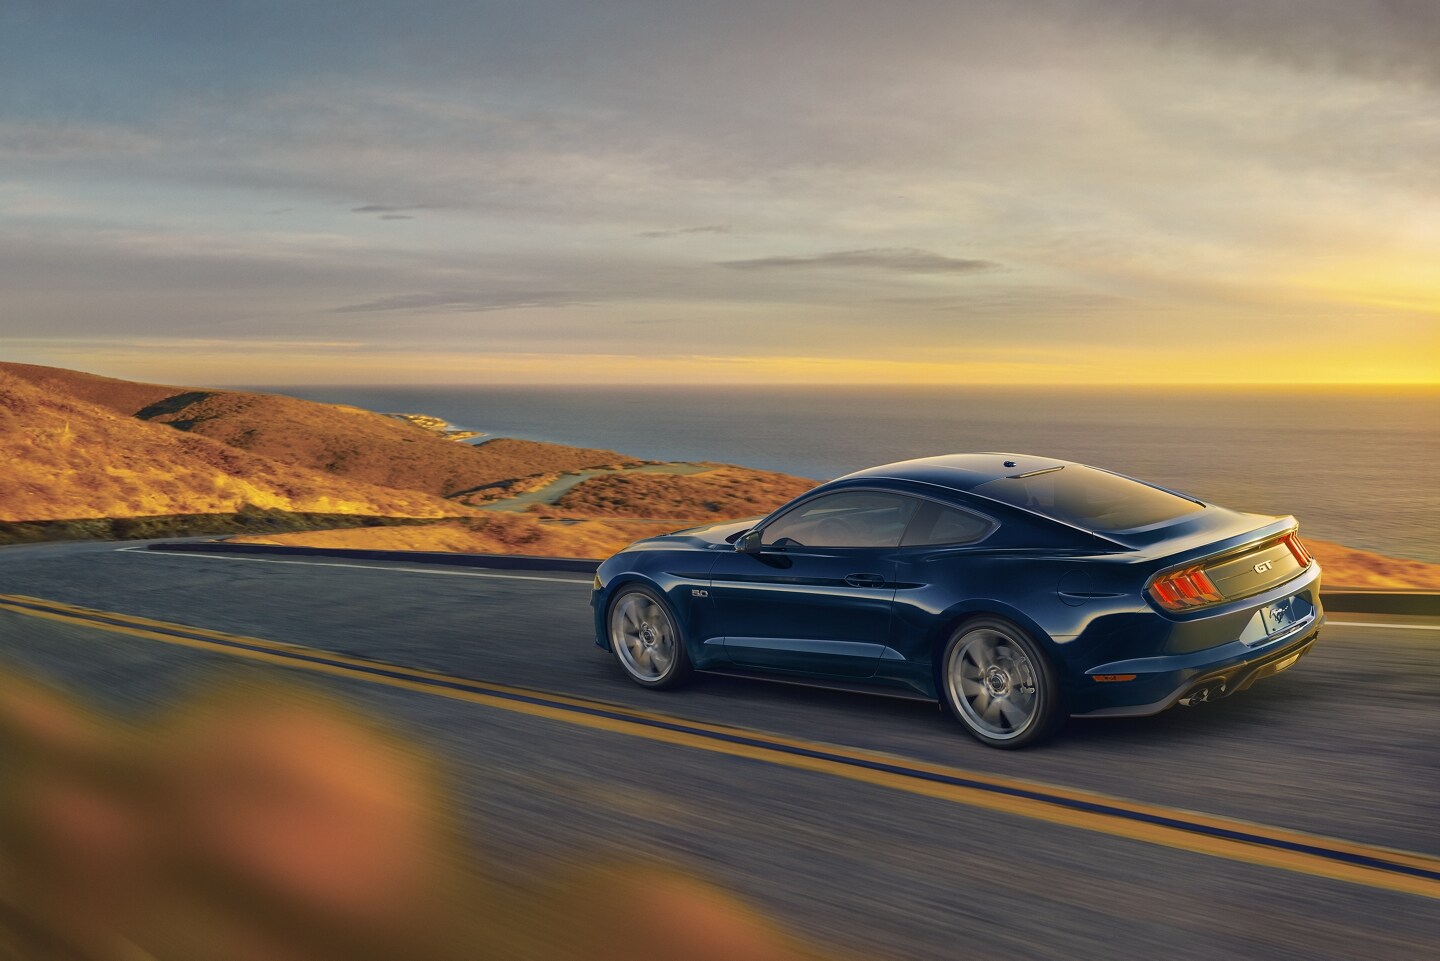 2021 Ford Mustang in Antimatter Blue being driven on the open road with an ocean in the background